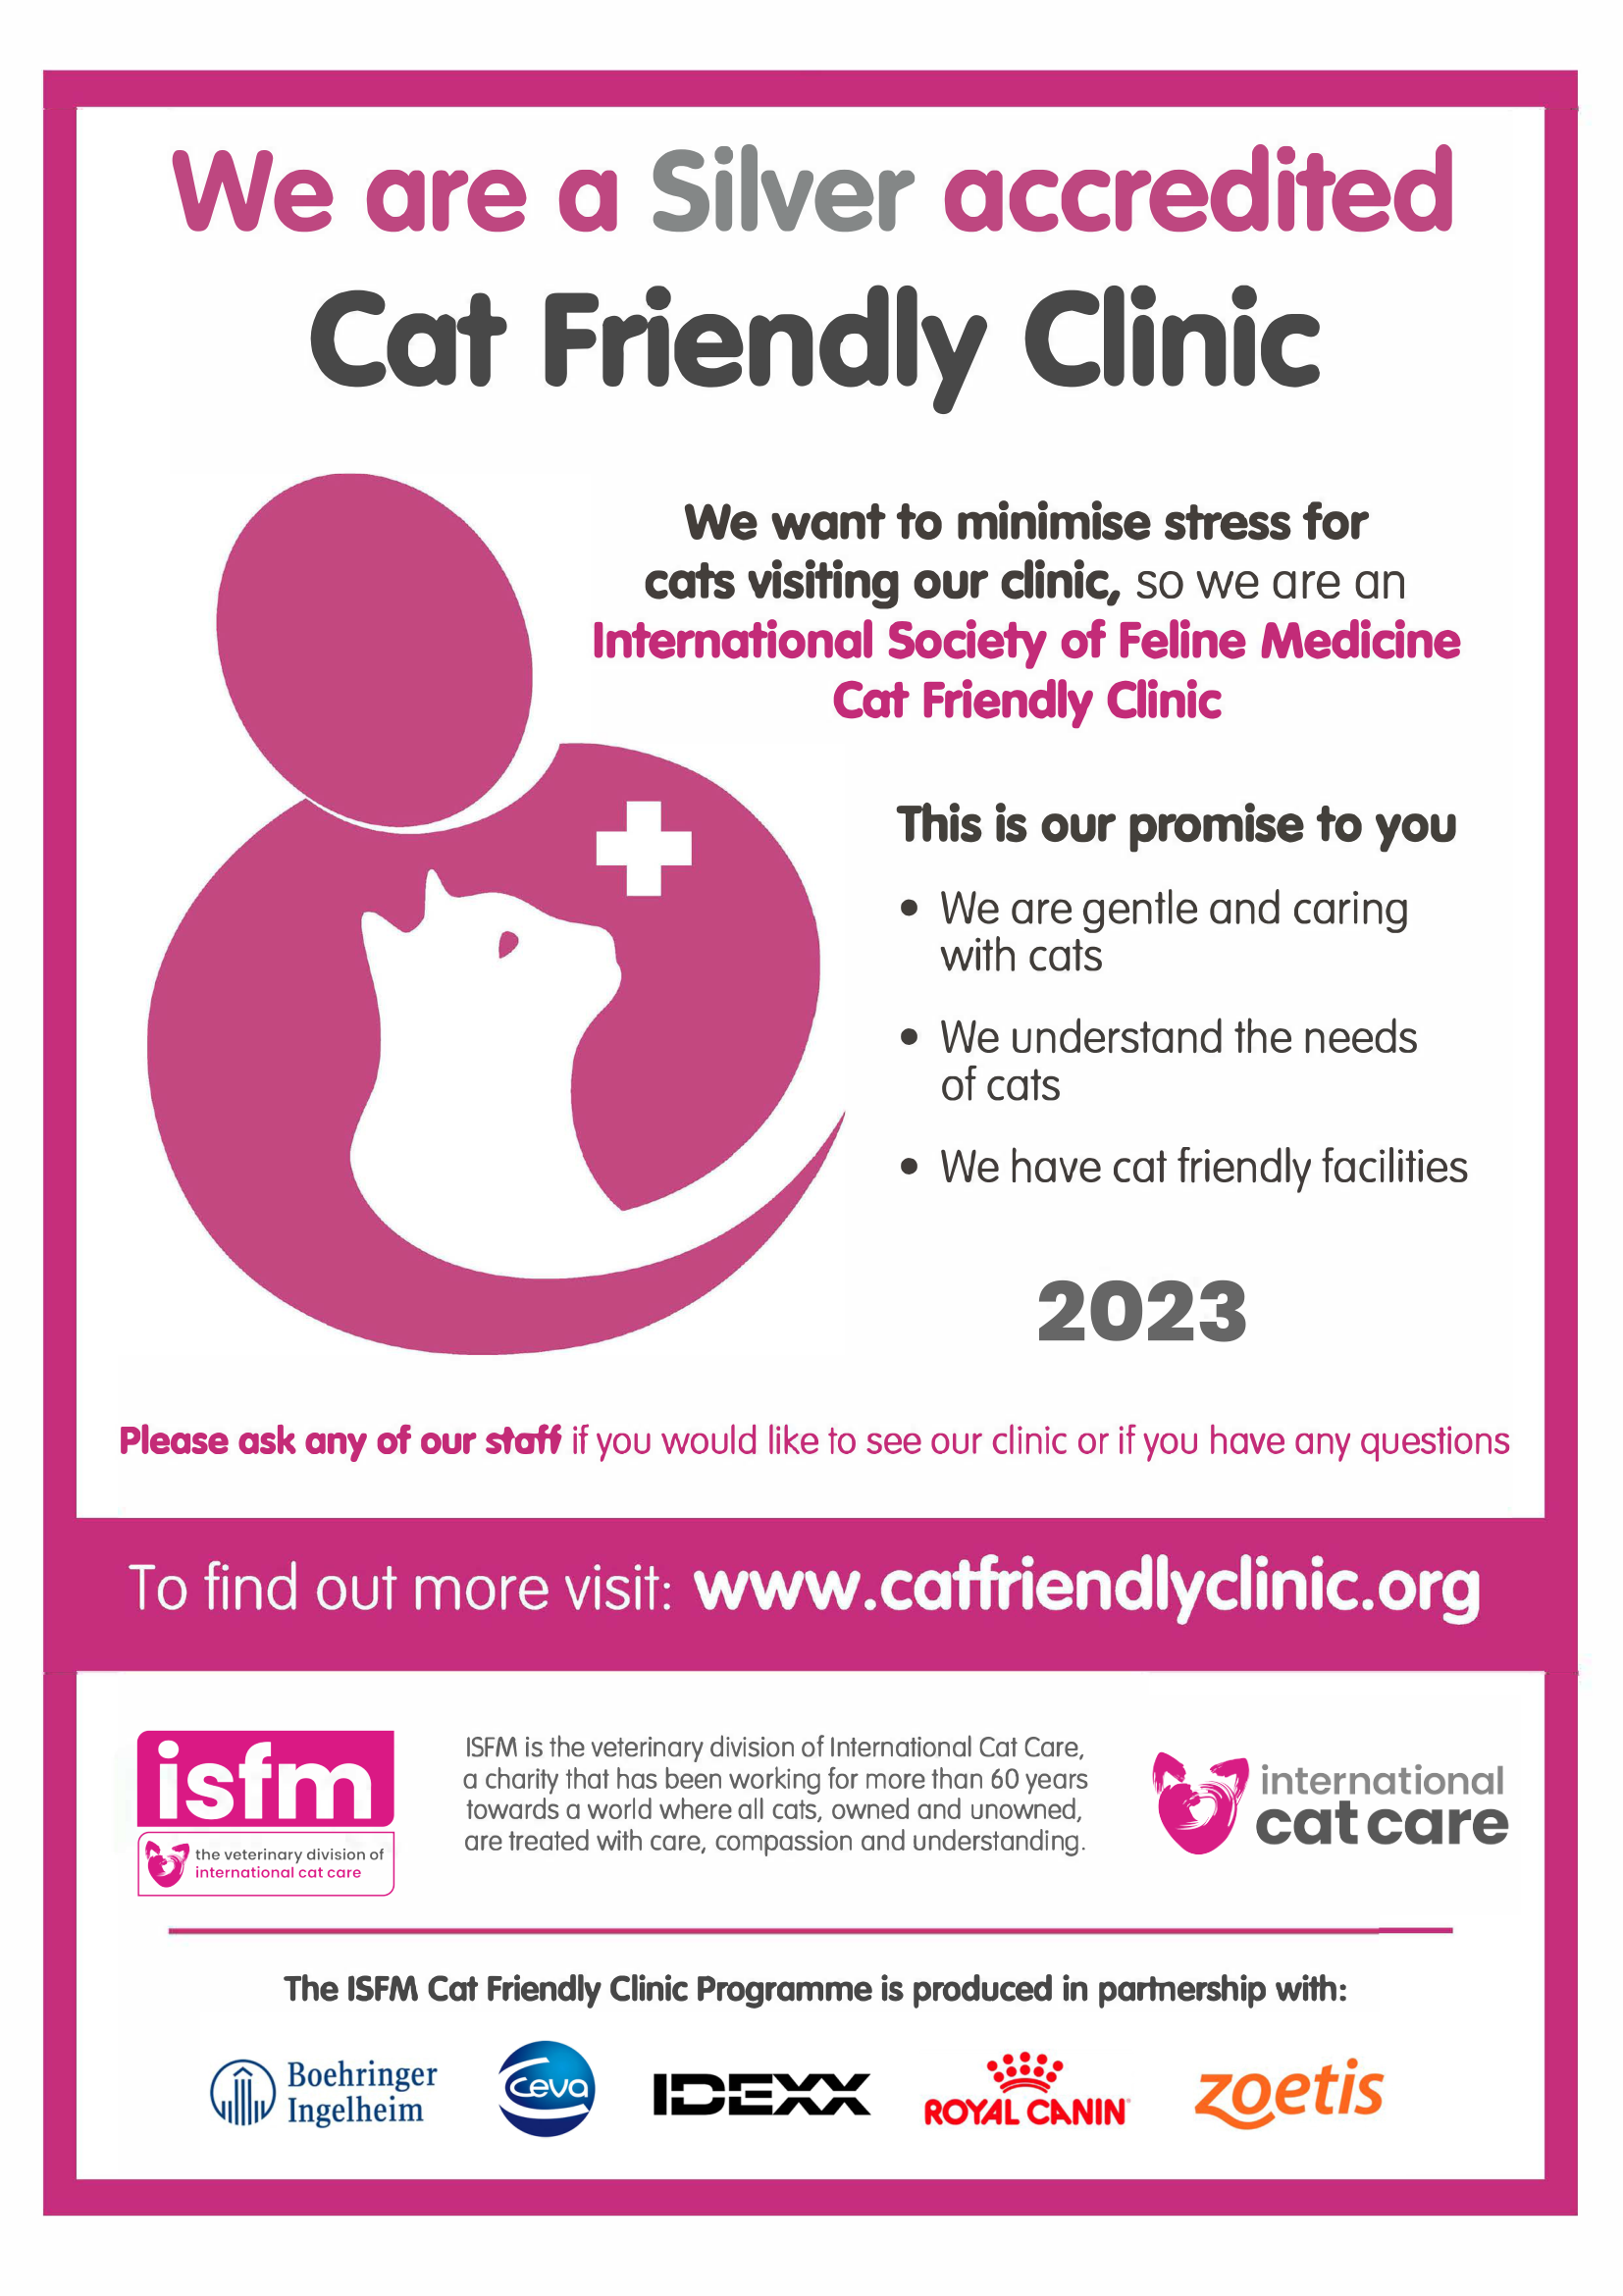 We are a cat friendly silver accredited practice